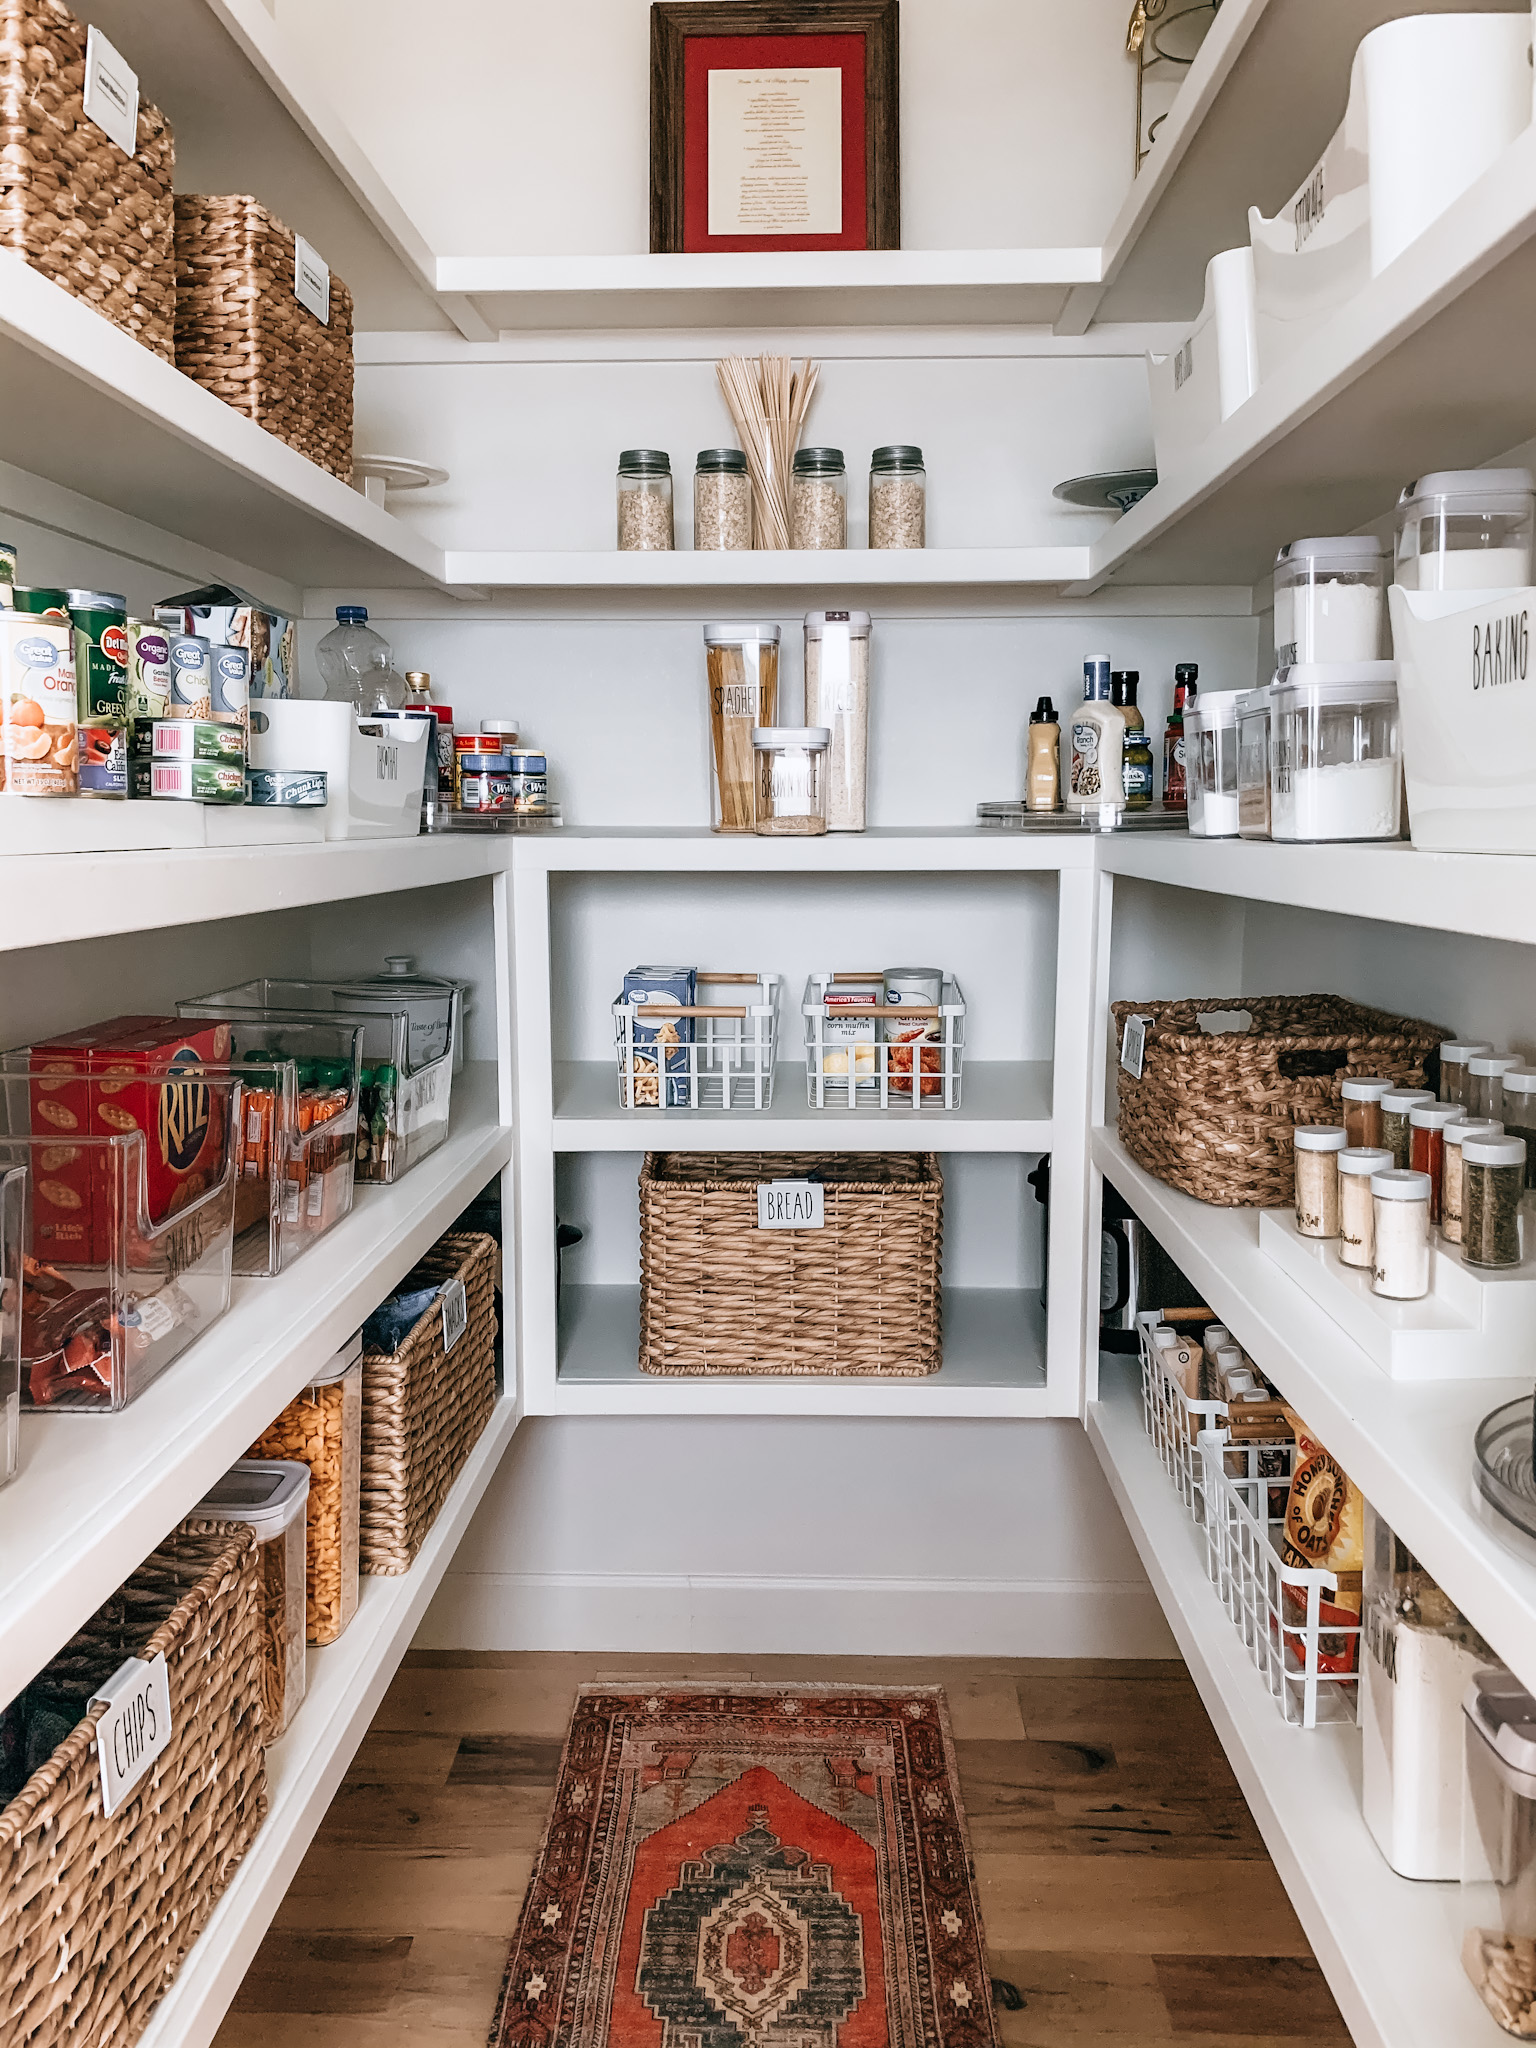 Pantry Organization with The Hull Space - Lindsey Meek